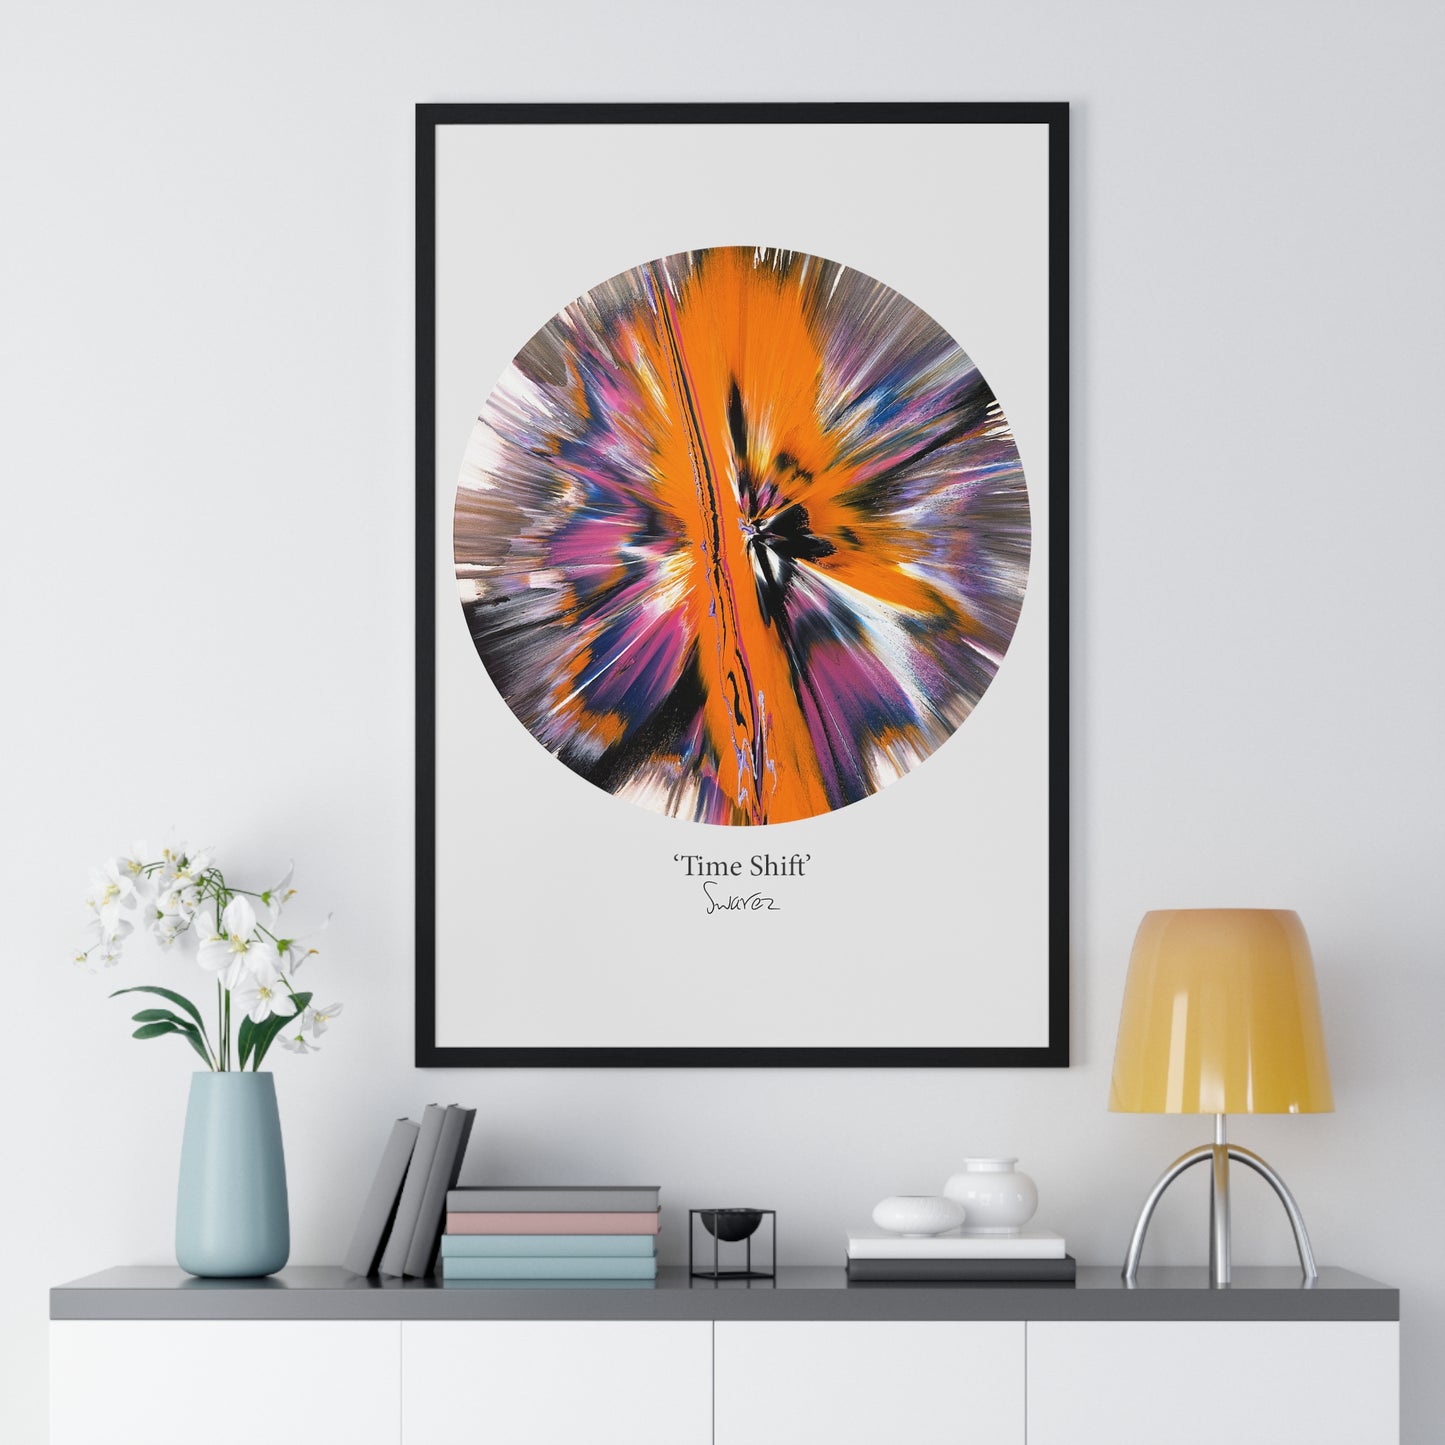 'Time Shift' by Swarez - Limited Edition Framed Vertical Poster Print